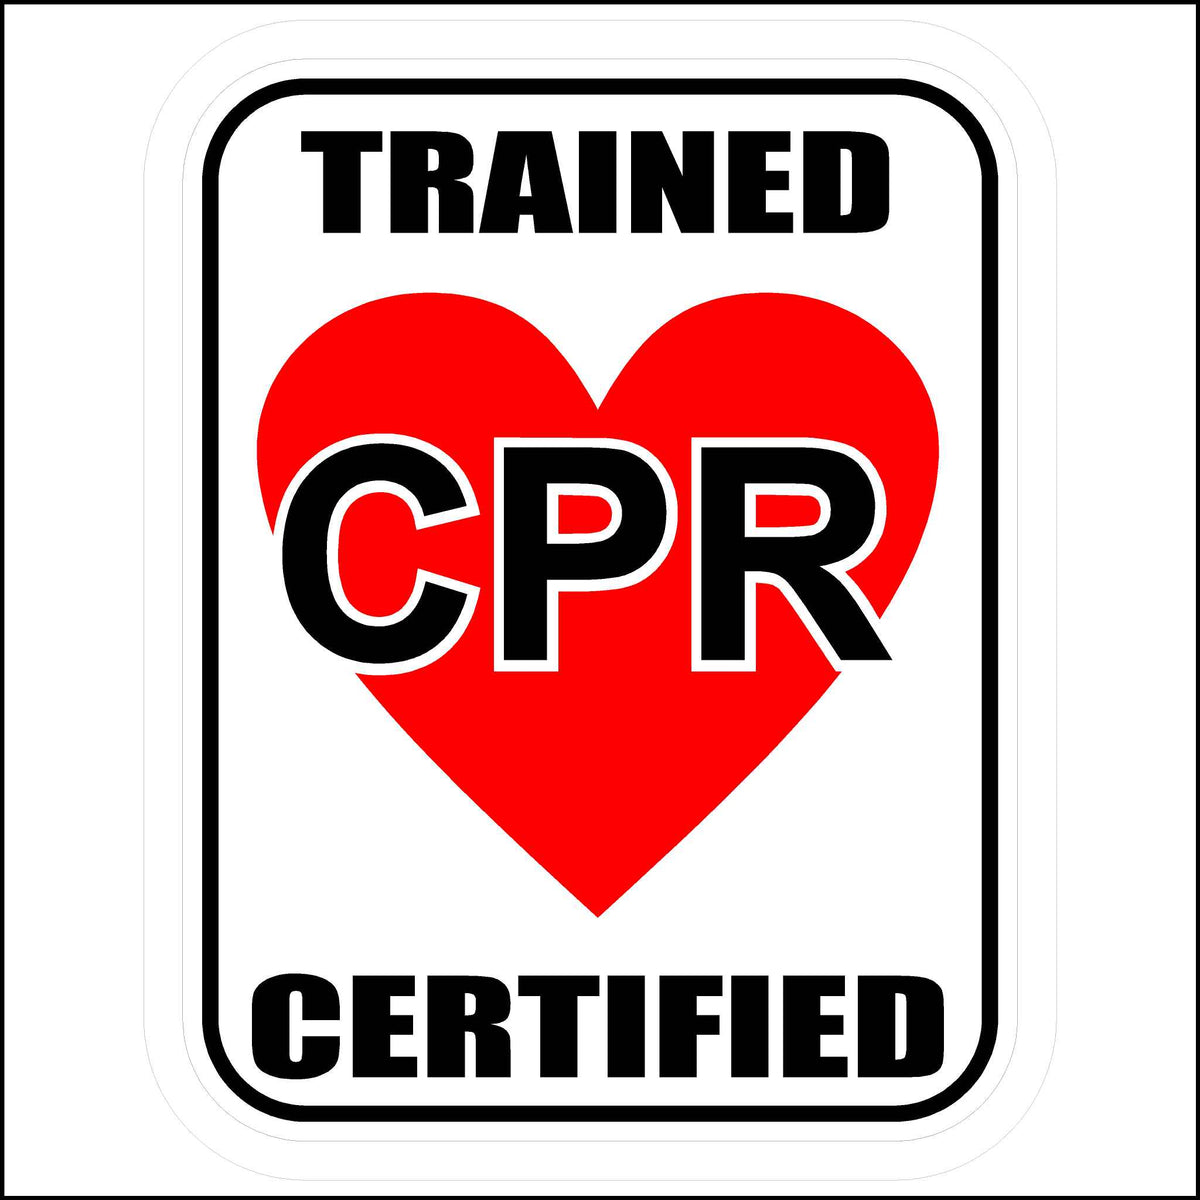 Red, White, and Black CPR Trained and Certified Hard Hat Sticker.